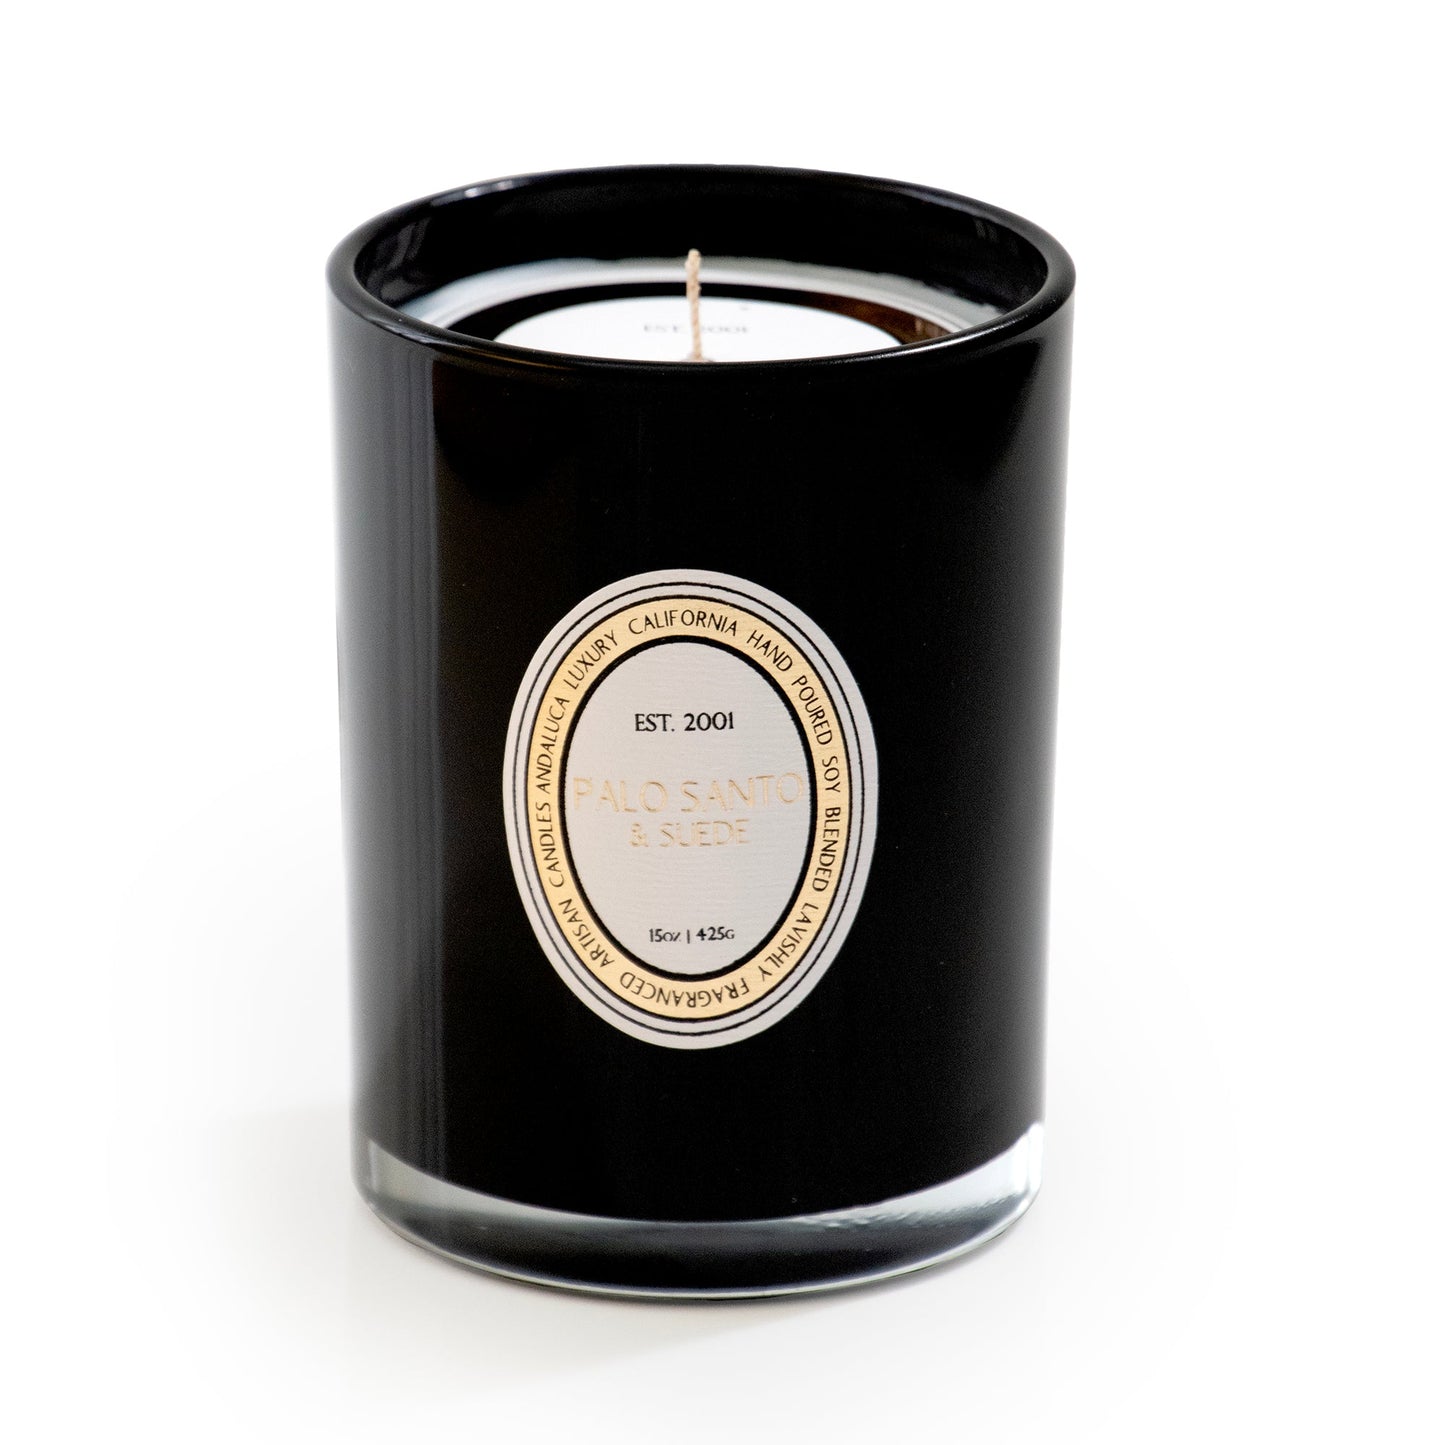 Palo Santo & Suede 15 oz. Glass Candle by Andaluca Home